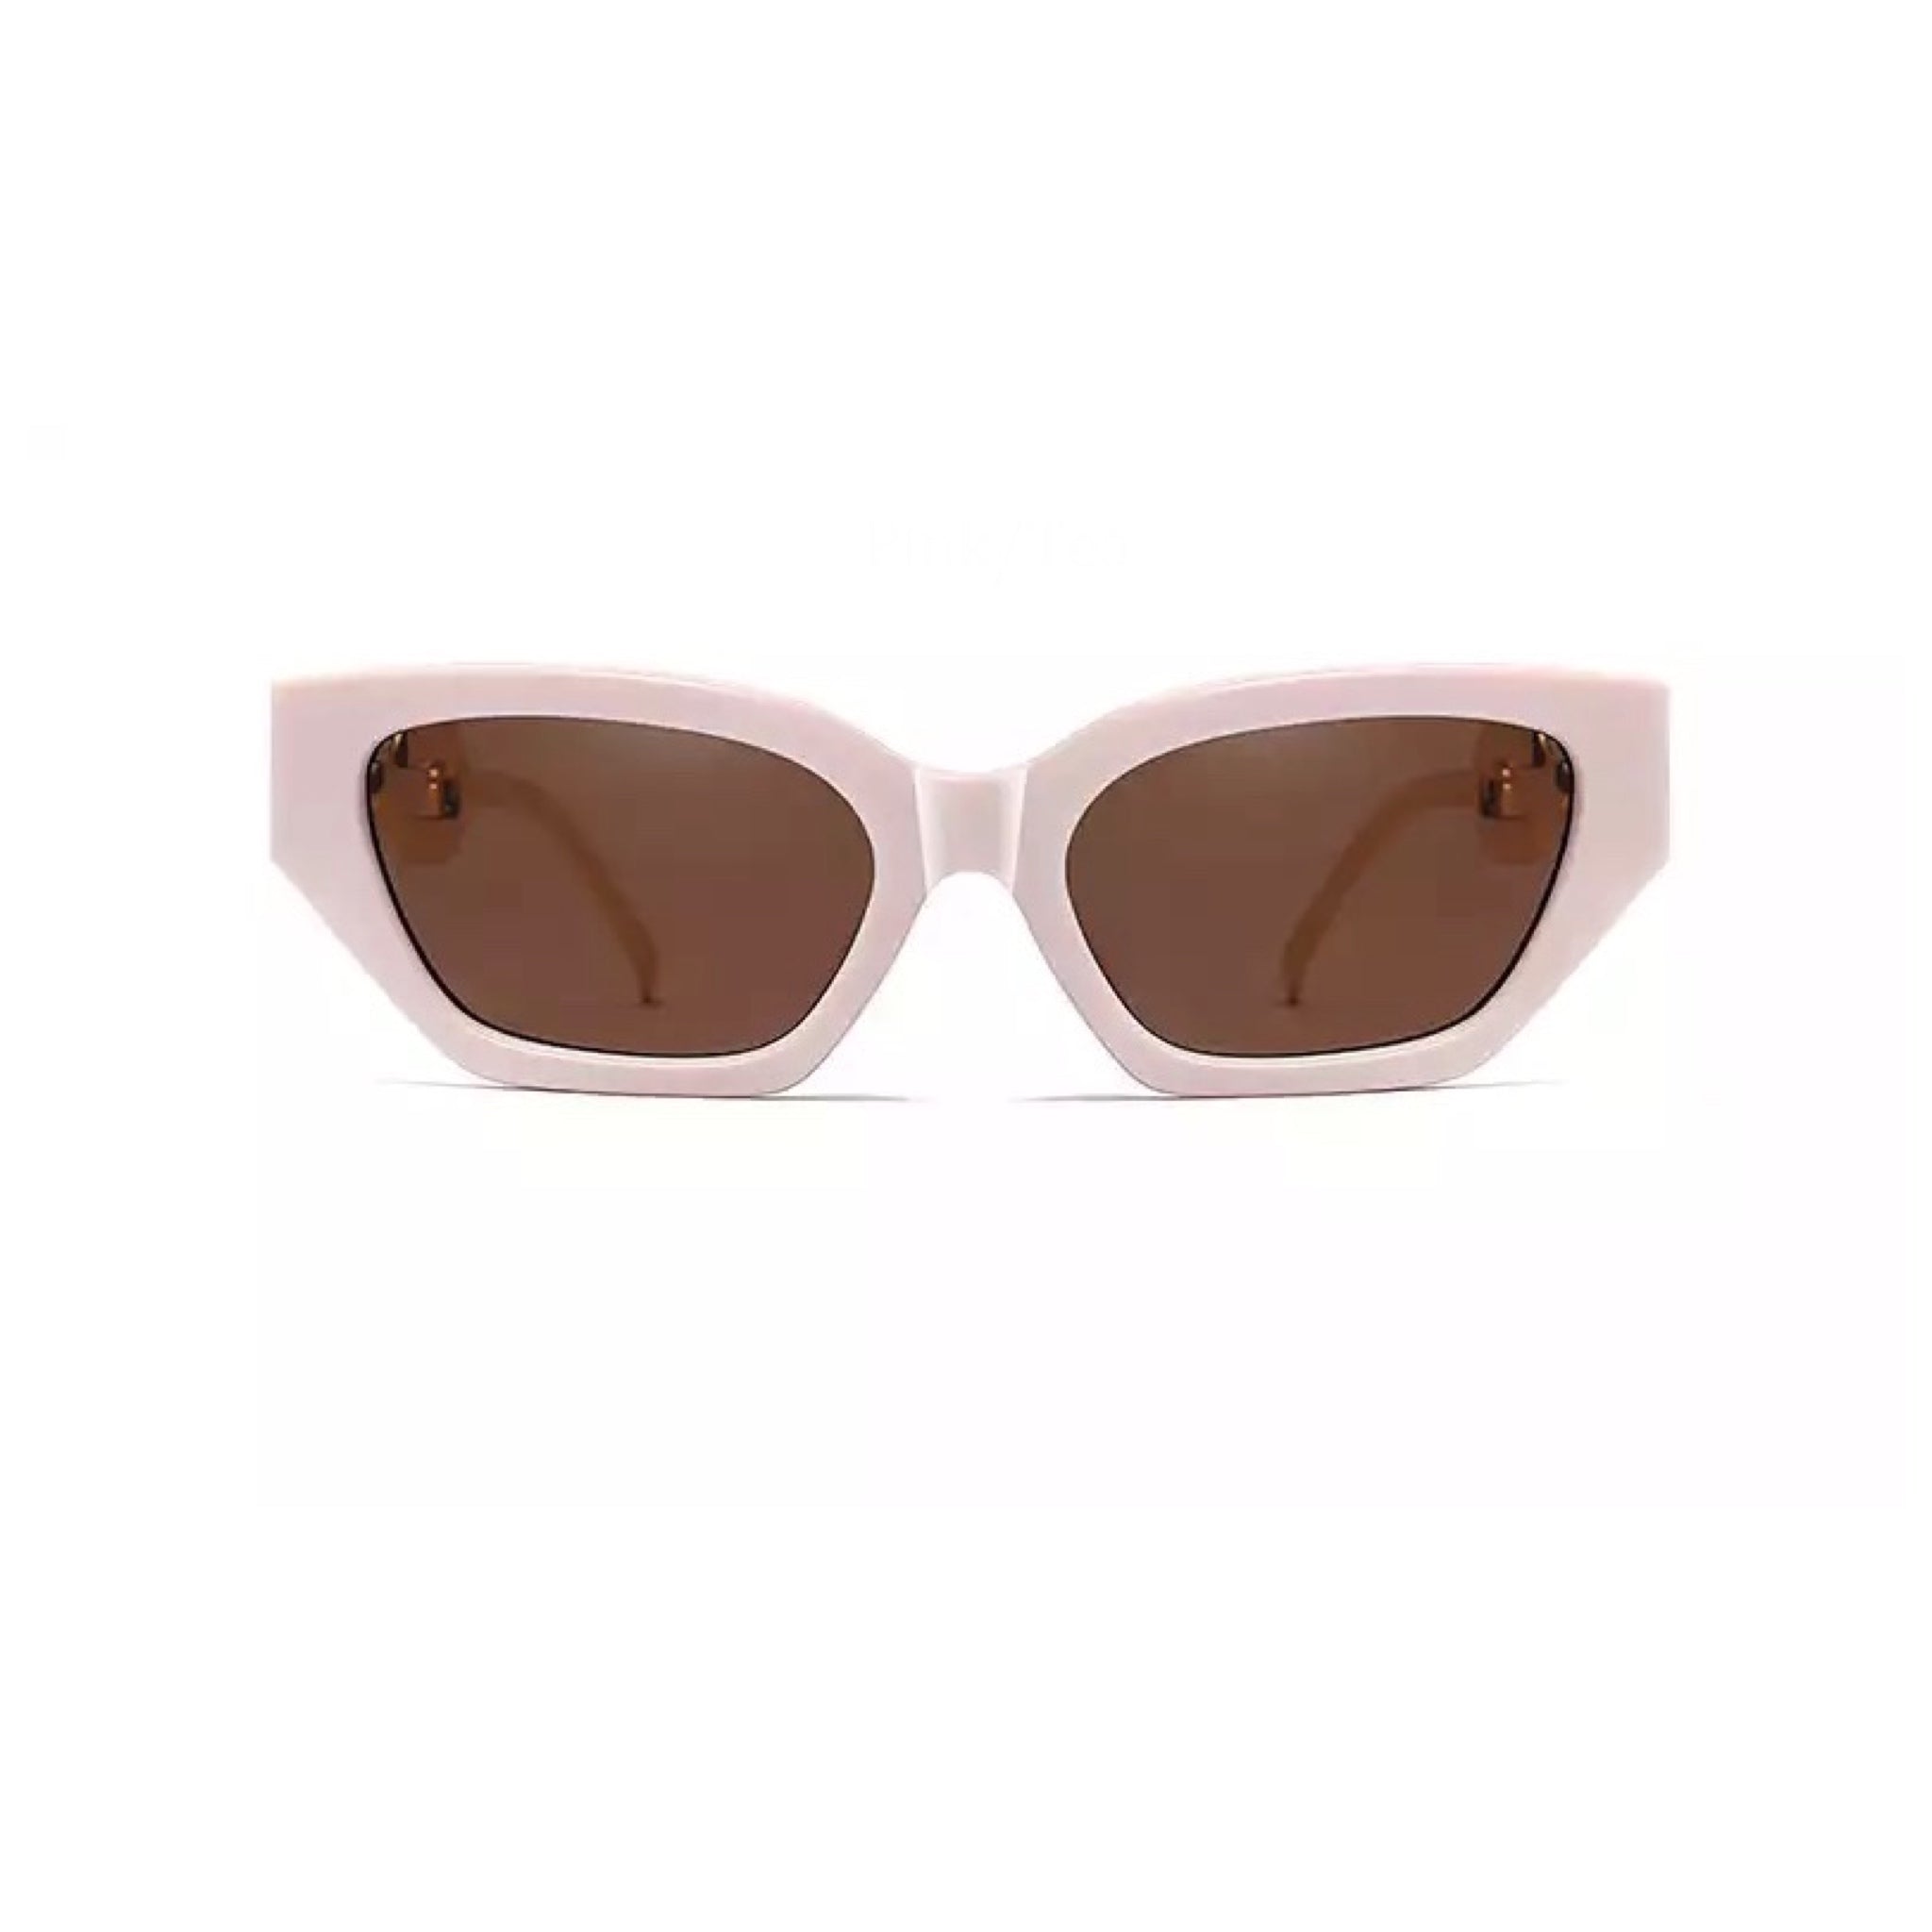 GOLDxTEAL blush cat eye sunglasses with metal chain arms.